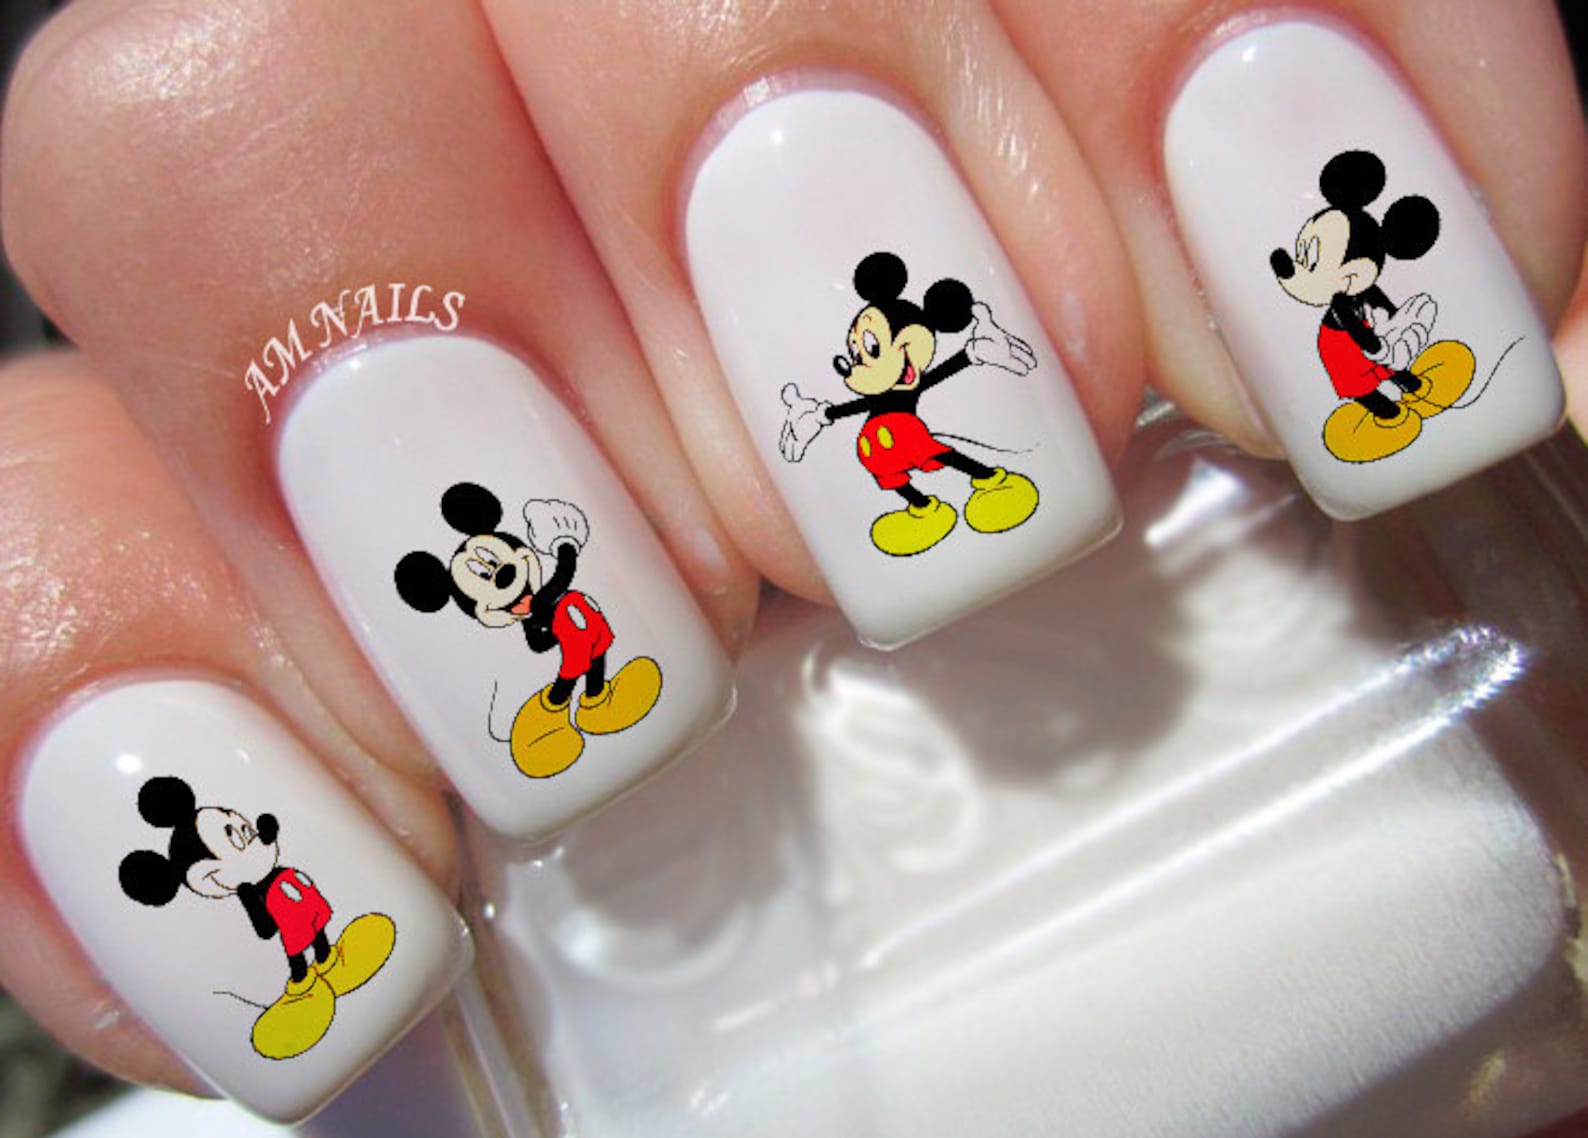 6. Minnie and Mickey Mouse Nail Art - wide 2